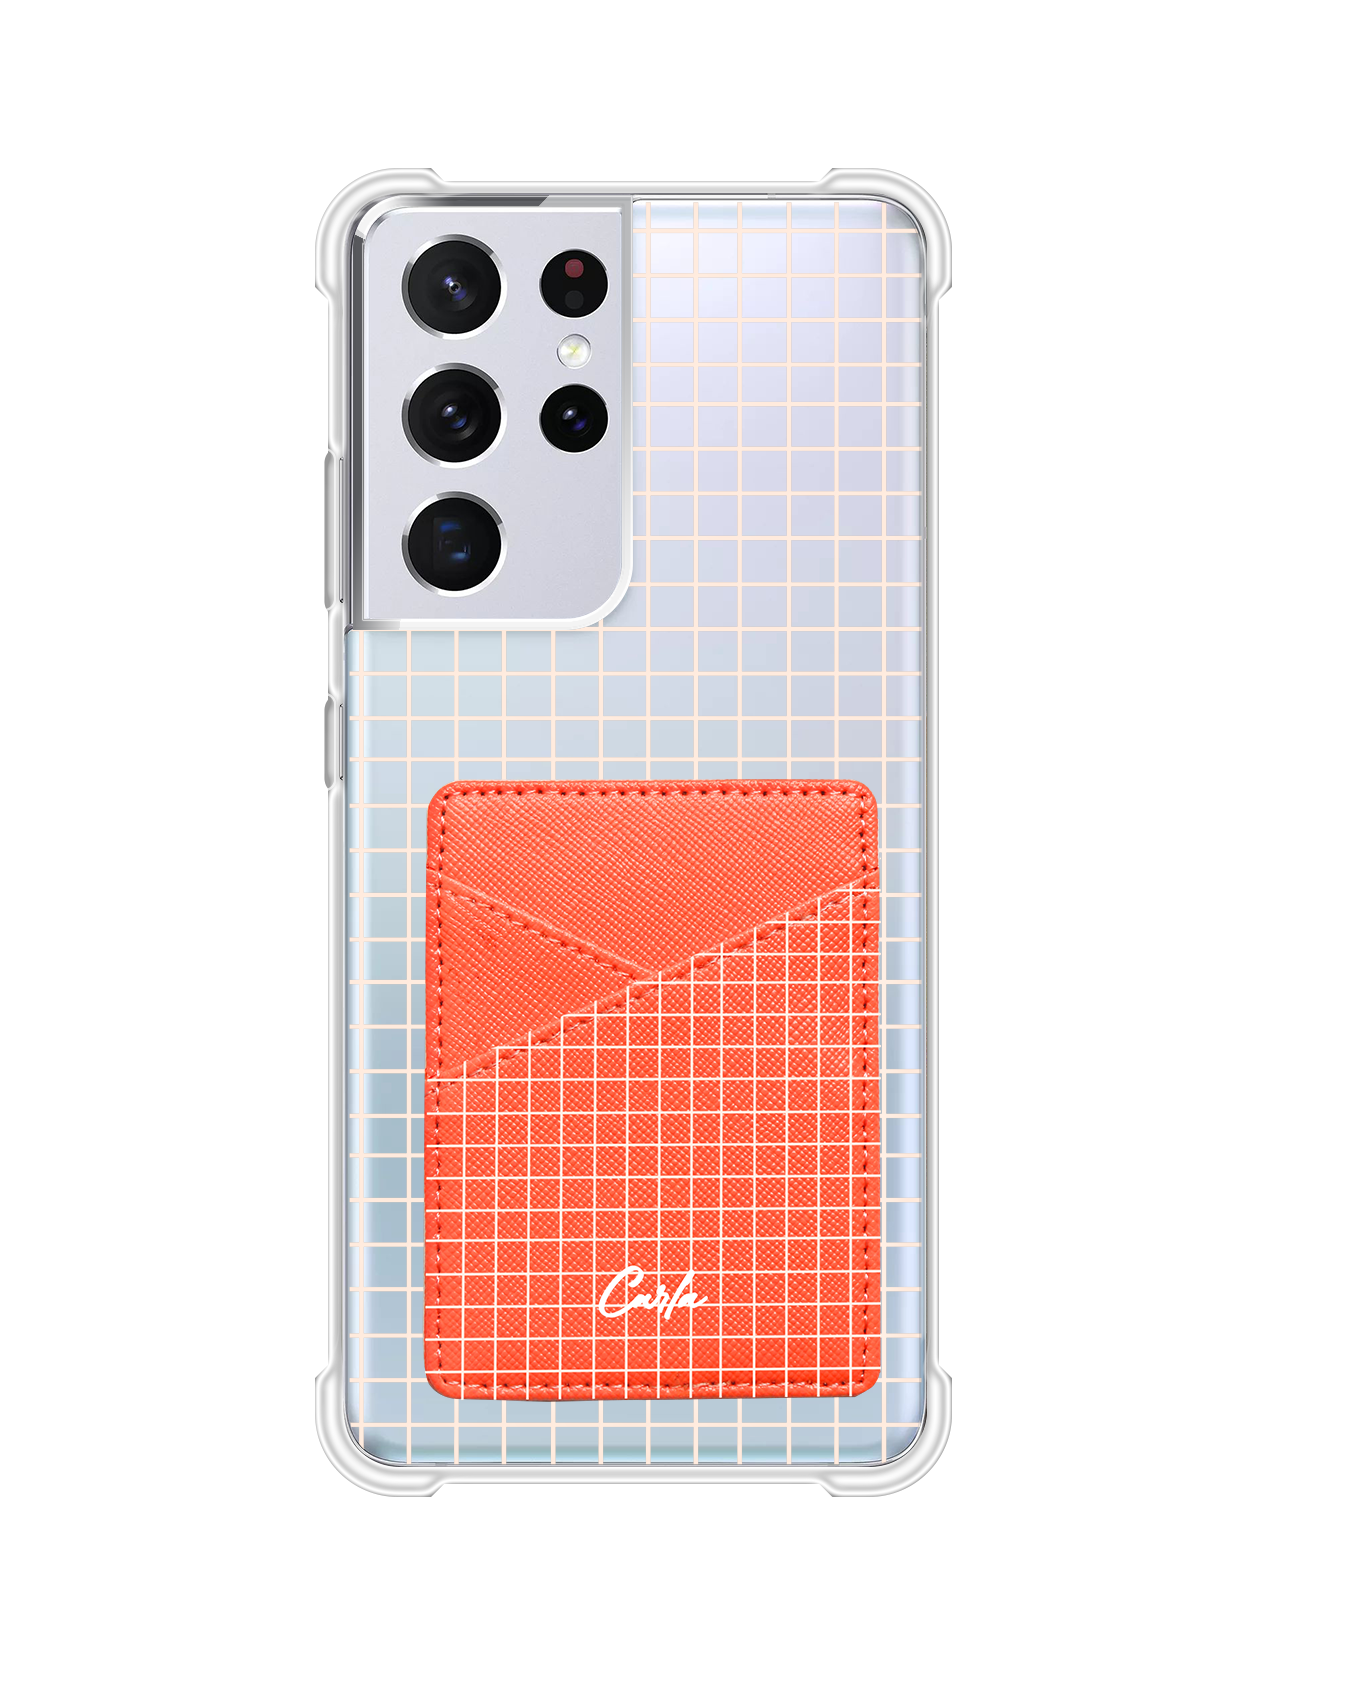 Android Phone Wallet Case - Grid